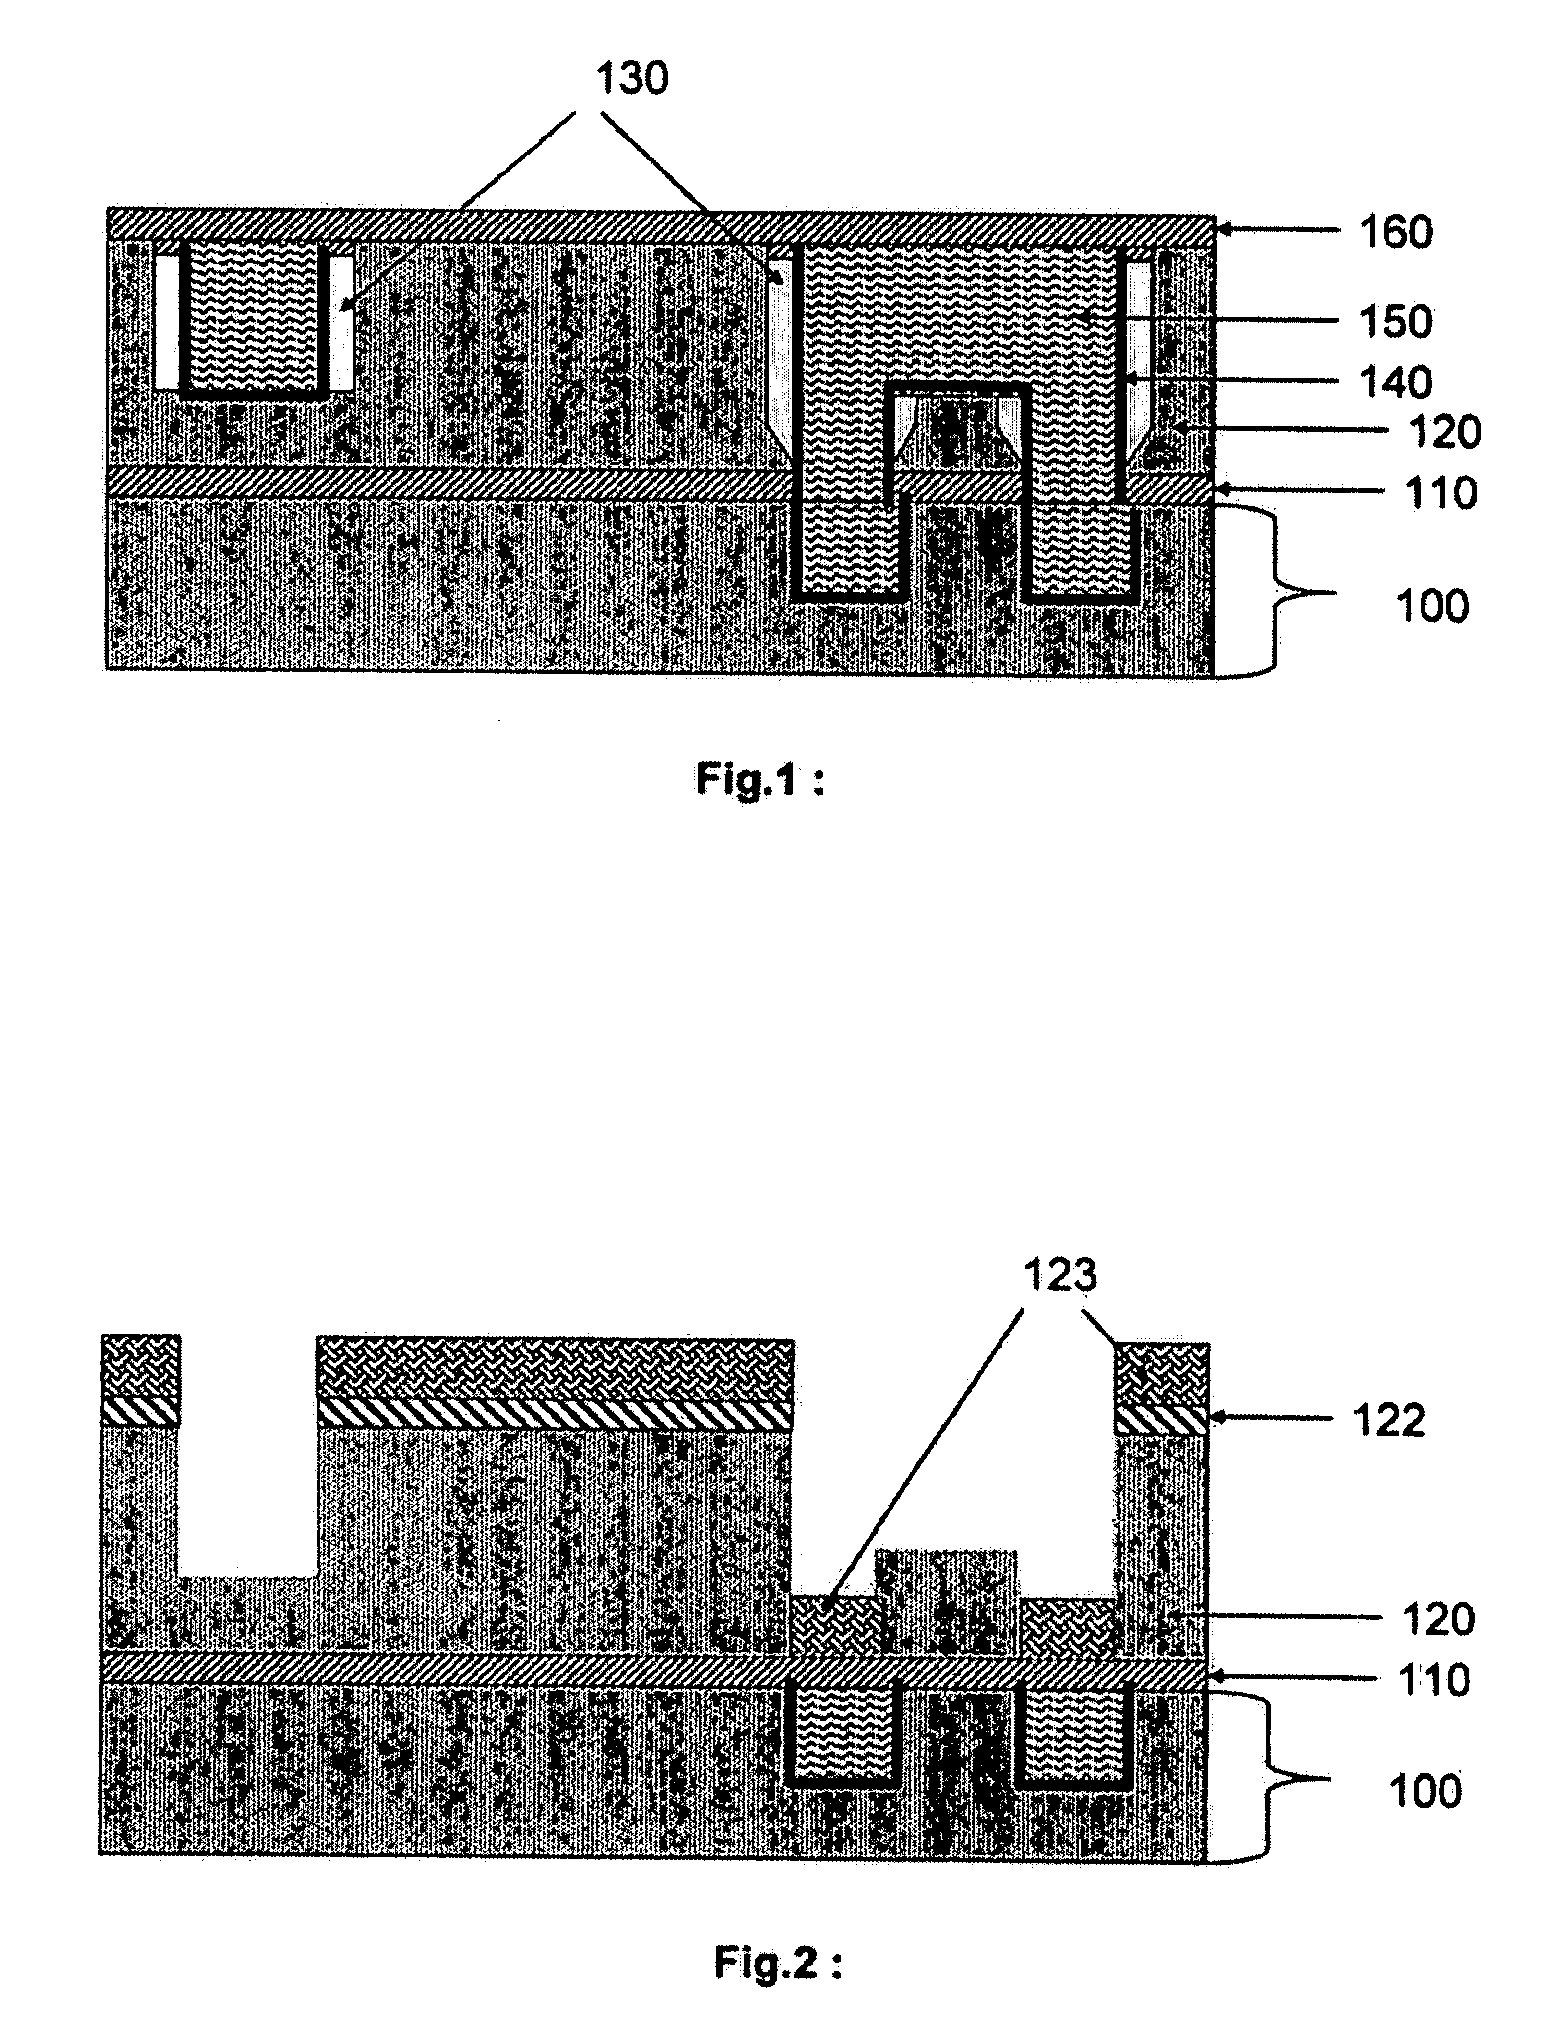 Interconnect Structures Incorporating Air-Gap Spacers